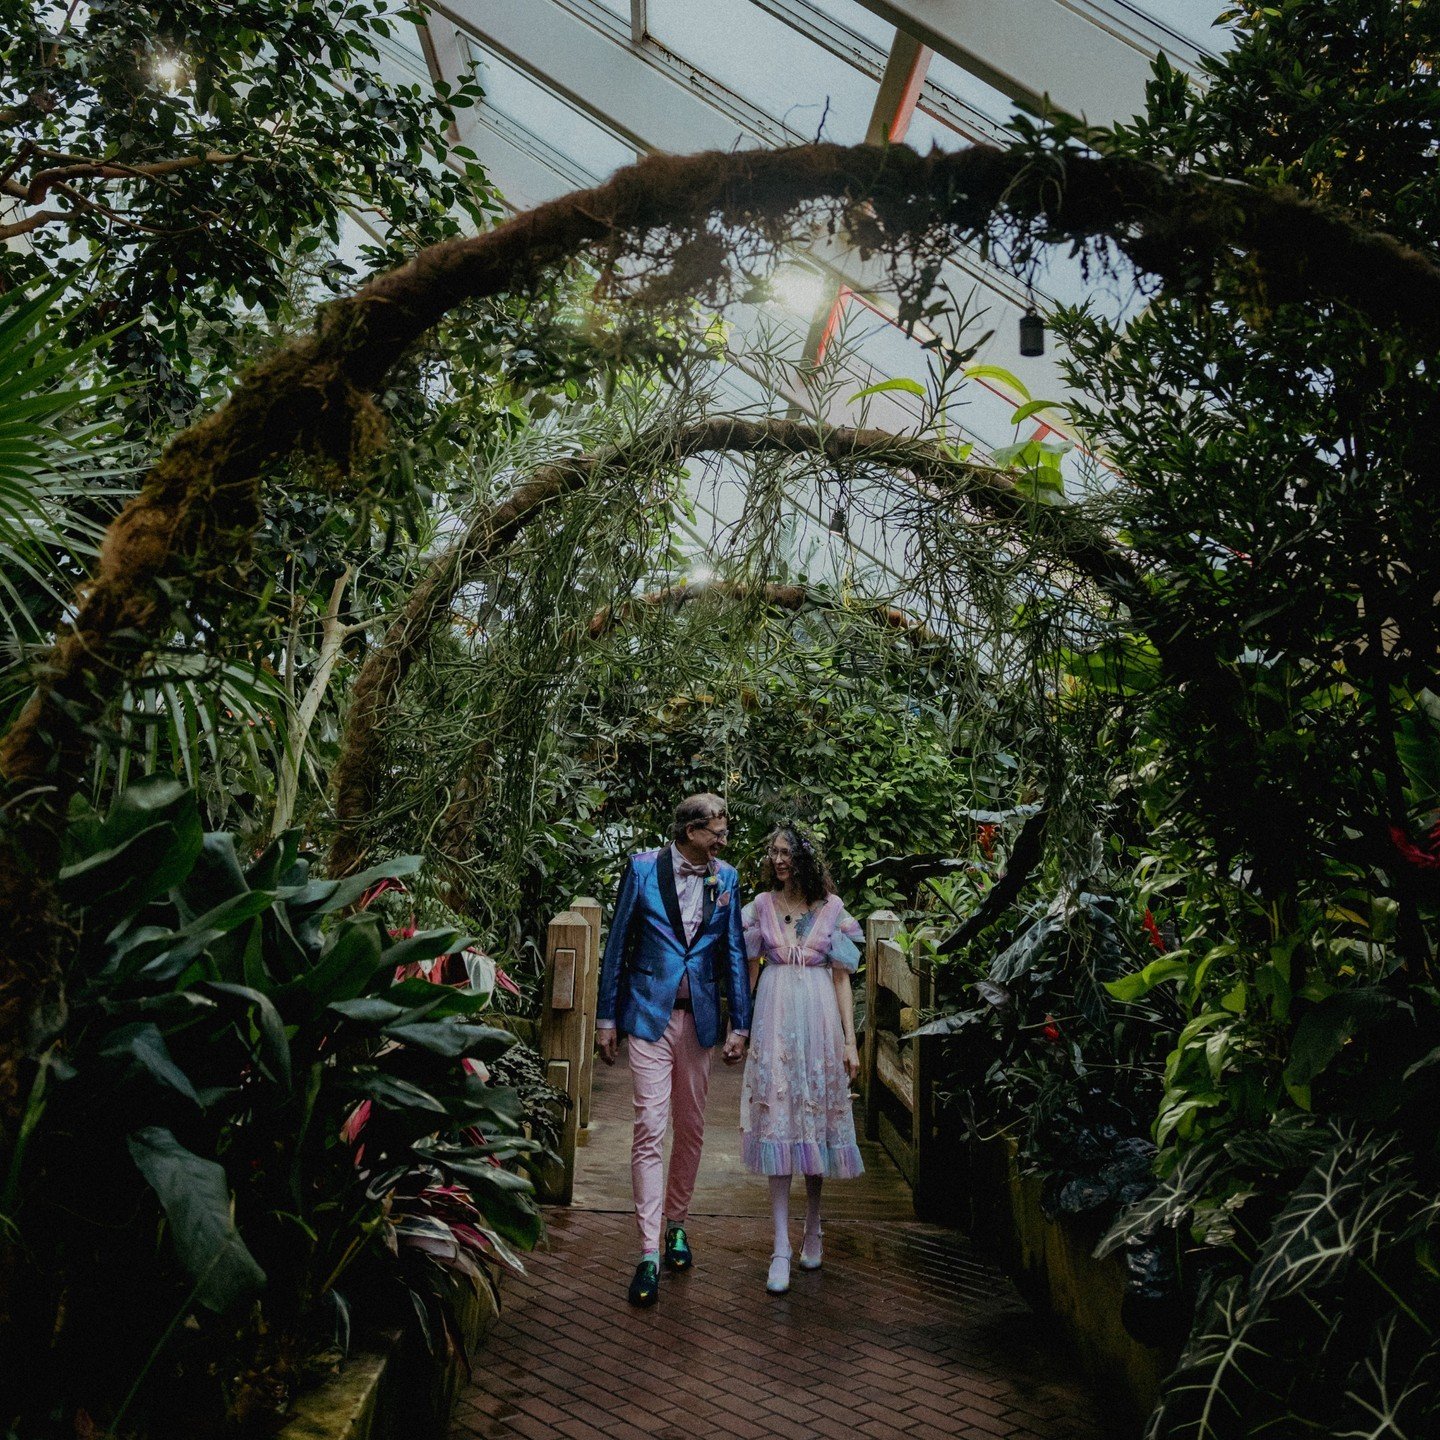 Jennifer + George's wedding at @olbrichgardens was as colorful as a unicorn and just as sweet! Look at these candy-colored outfits coupled with those sweet smiles and I think you'll agree that this wedding was perfect! 🤩🌈&hearts;️
.
.
.
.
.
[Image 